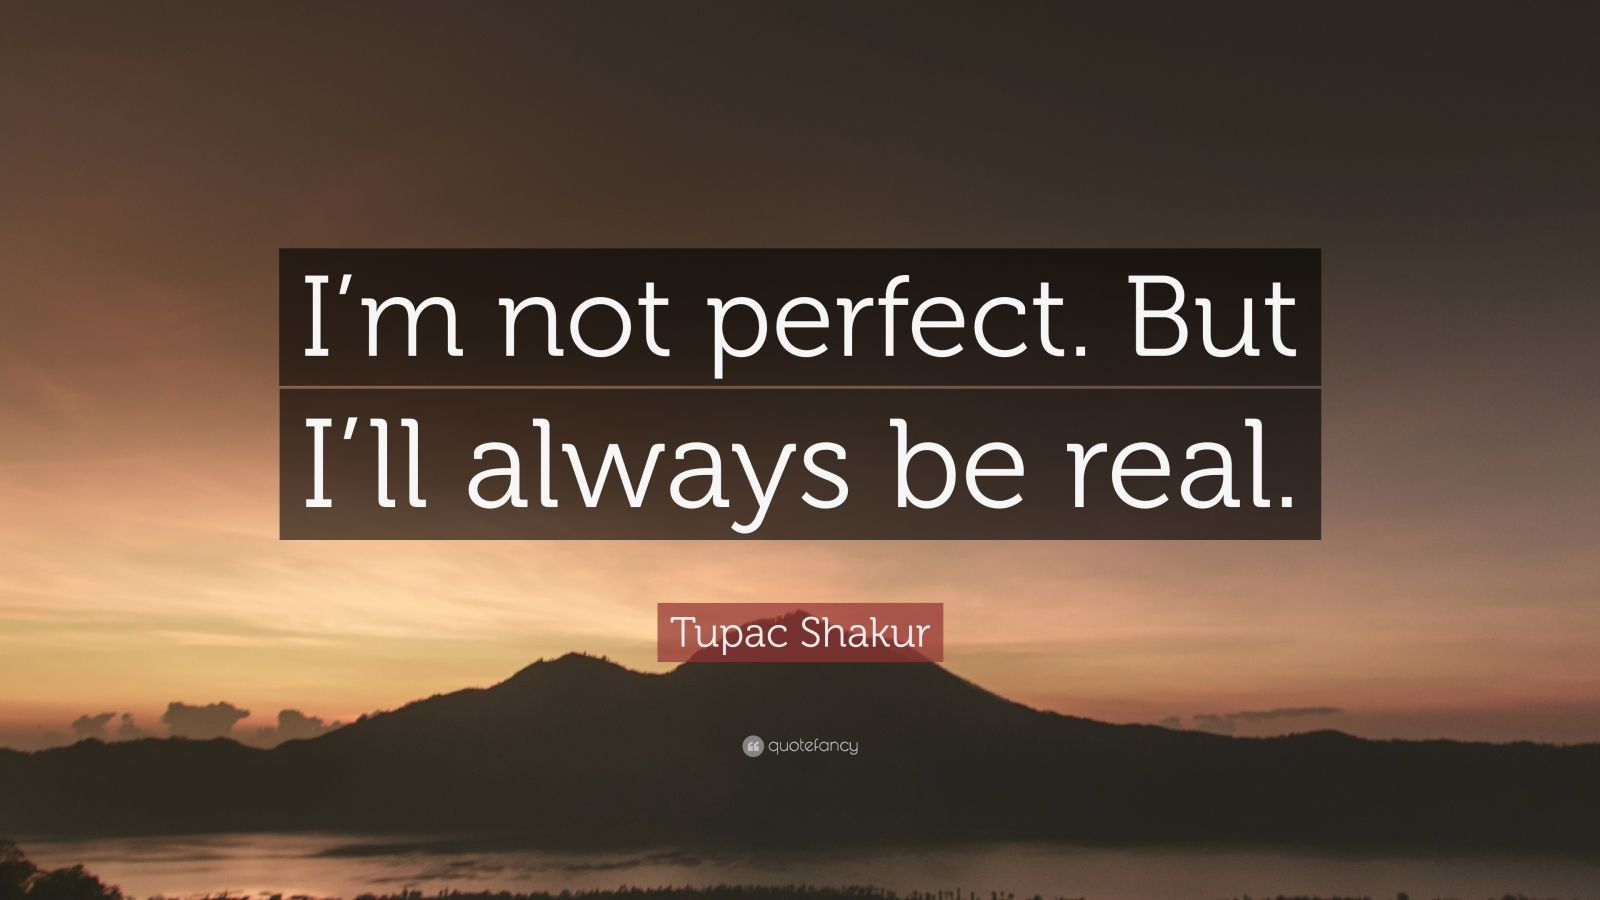 Tupac Shakur Quote: “I’m not perfect. But I’ll always be real.” (12